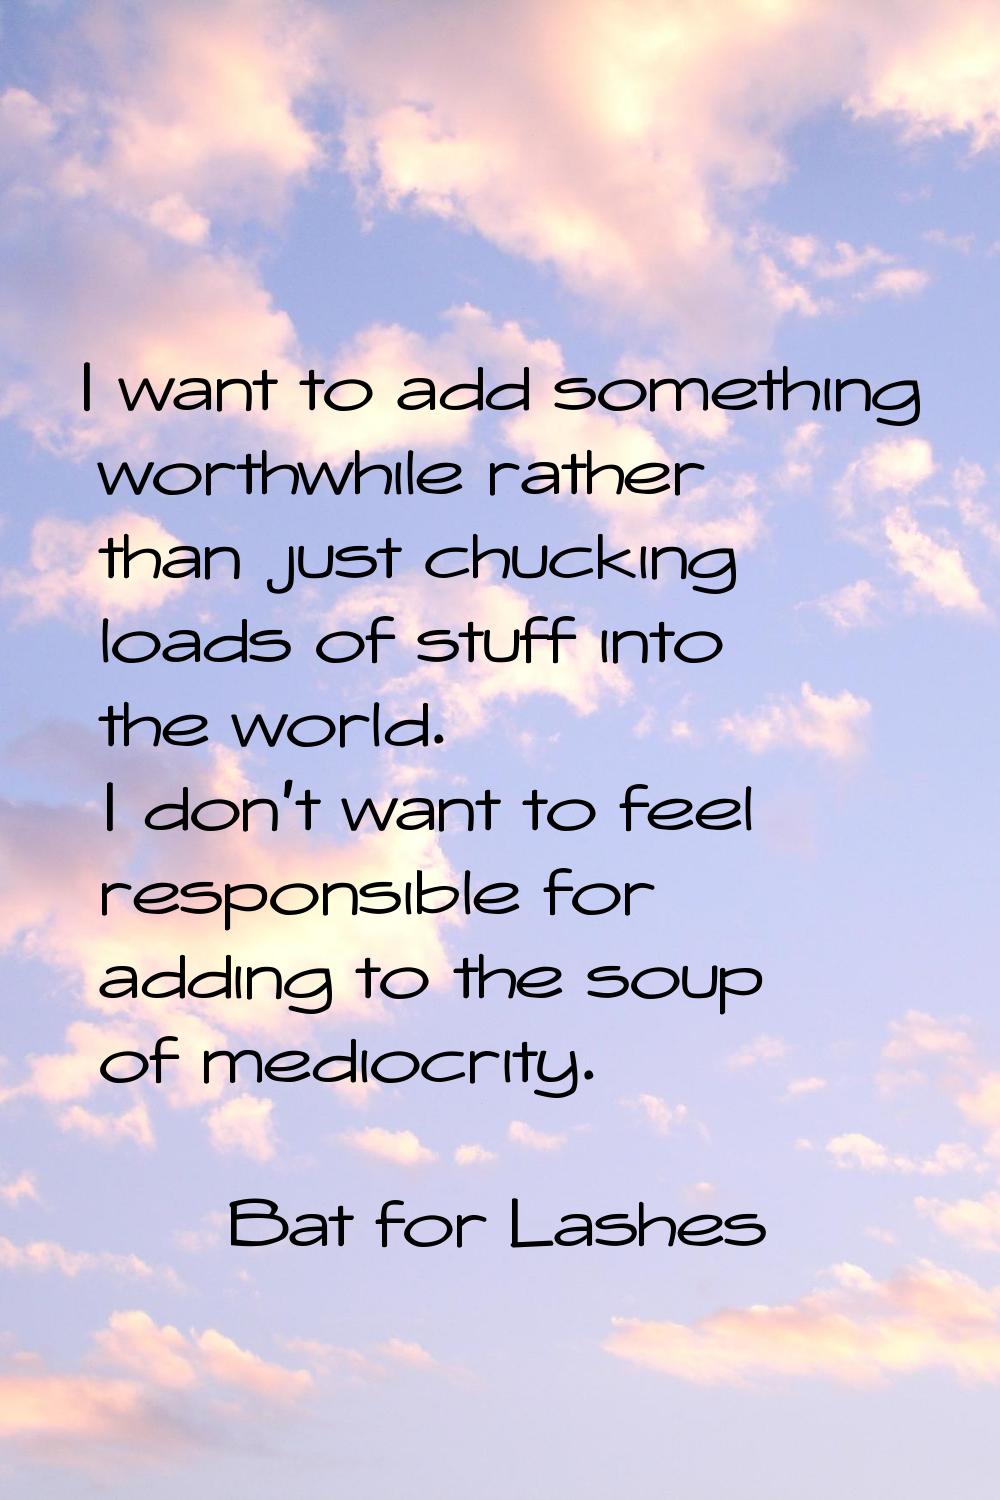 I want to add something worthwhile rather than just chucking loads of stuff into the world. I don't